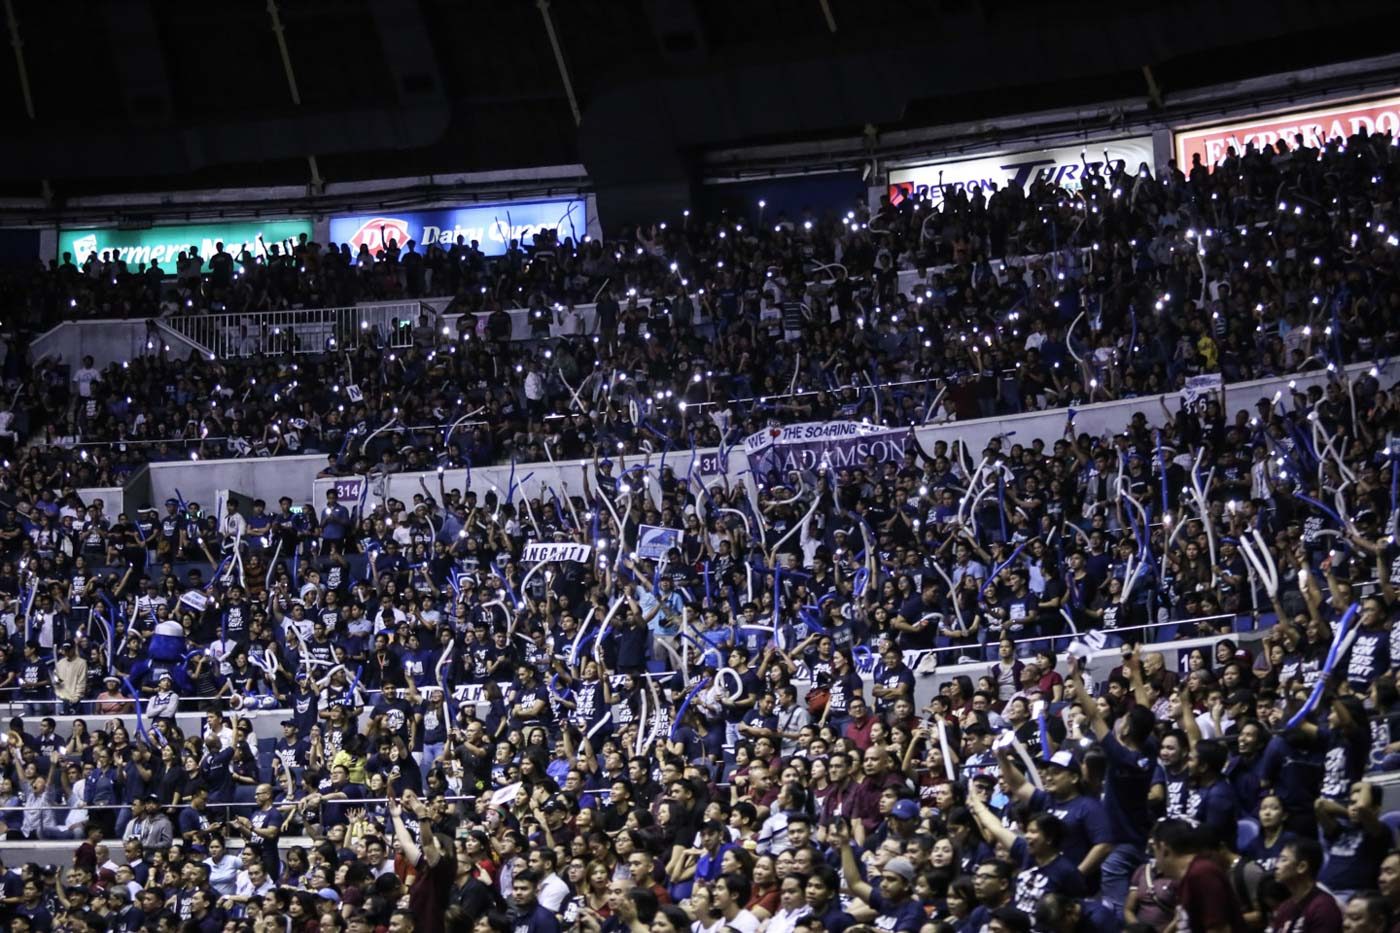 FULL HOUSE. Supporters fill the Araneta Coliseum in Quezon City during the do-or-die basketball match between the UP Fighting Maroons and Adamson University Soaring Falcons on November 28, 2018. Photo by Josh Albelda/Rappler   